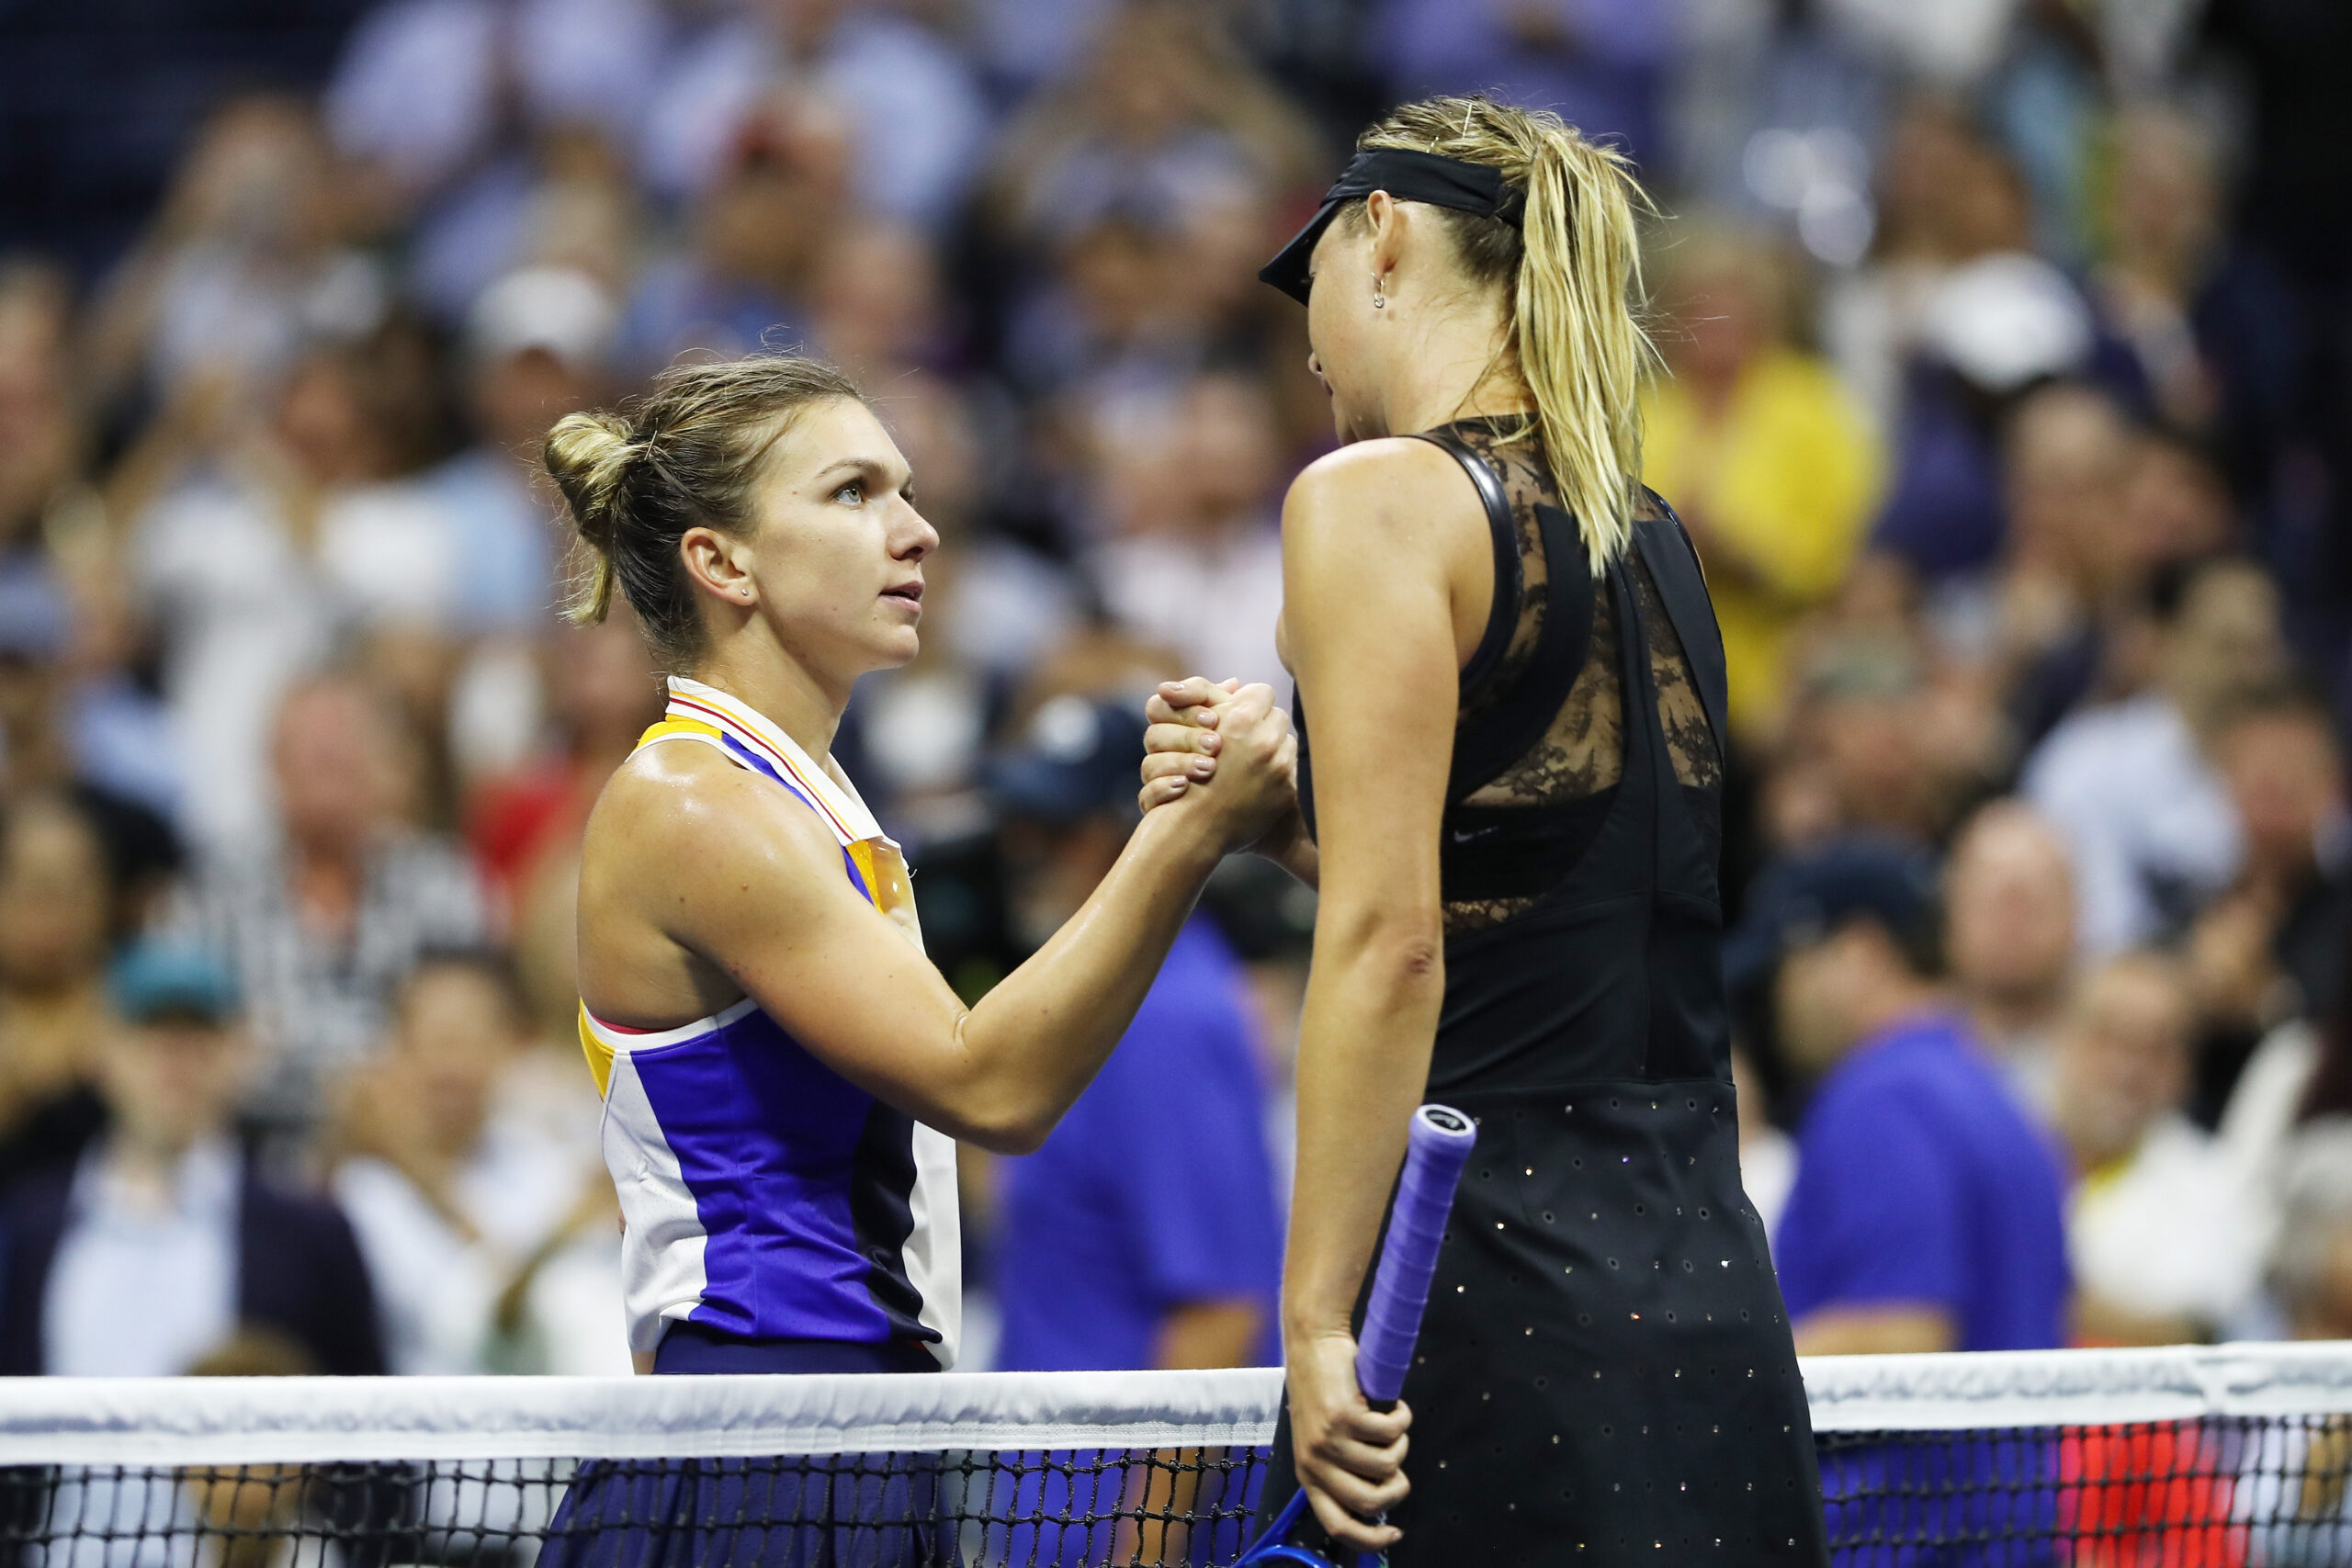 NEW YORK, NY - AUGUST 28:  Maria Sharapova (R) of Russia shakes hands with Simona Halep of Romania after defeating her in their first round Women's Singles match on Day One of the 2017 US Open at the USTA Billie Jean King National Tennis Center on August 28, 2017 in the Flushing neighborhood of the Queens borough of New York City.  (Photo by Elsa/Getty Images)